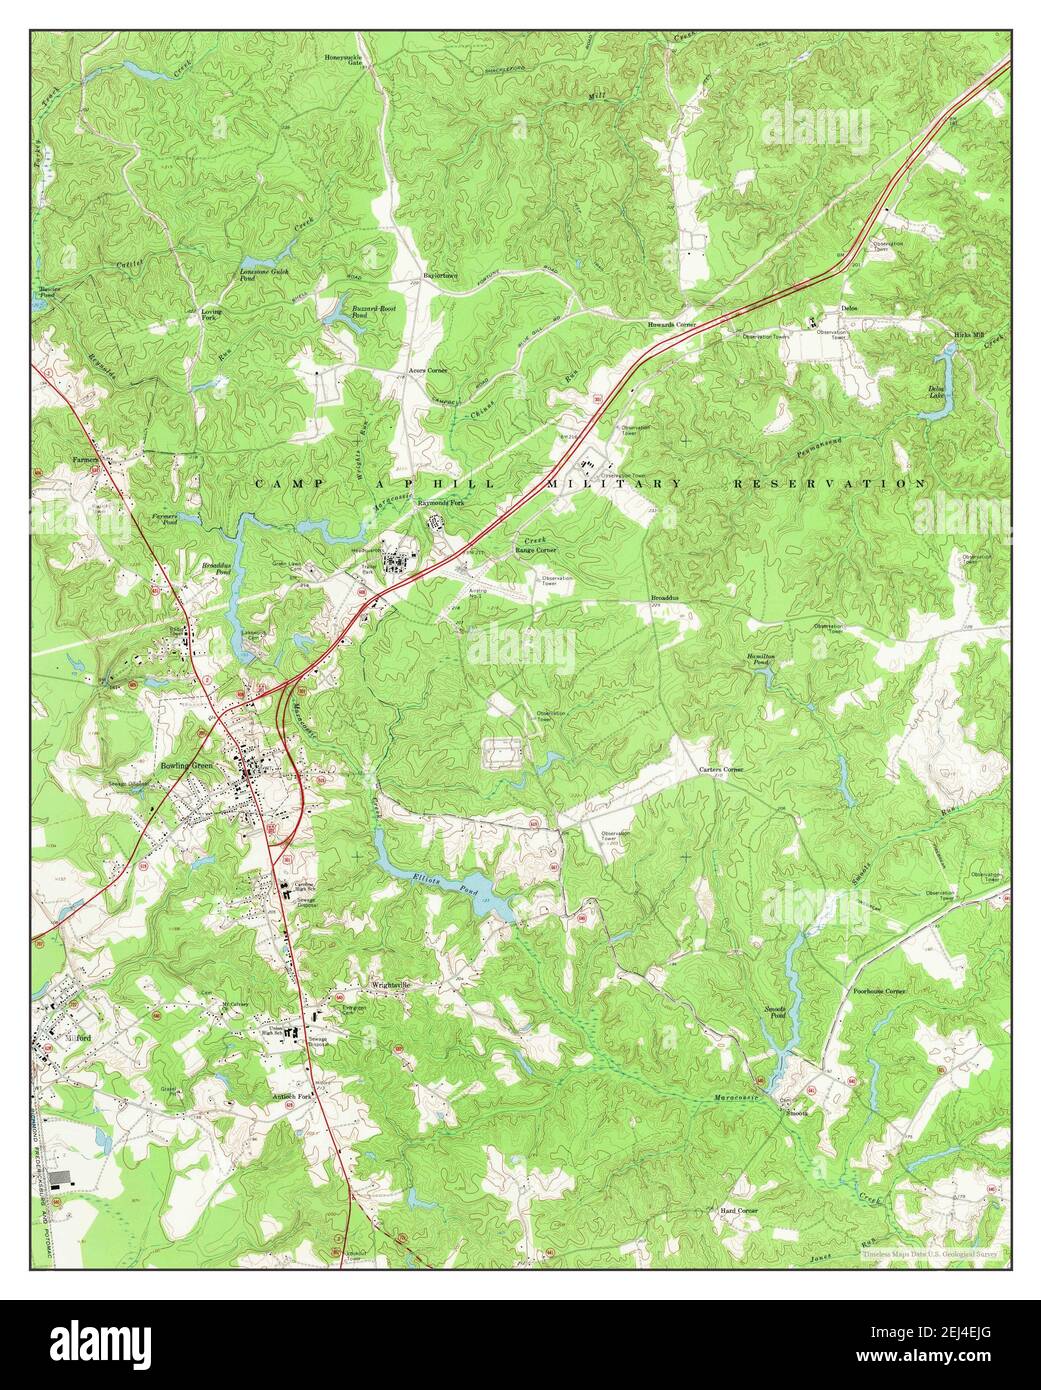 Bowling Green Virginia Map 1969 124000 United States Of America By Timeless Maps Data Us Geological Survey 2EJ4EJG 